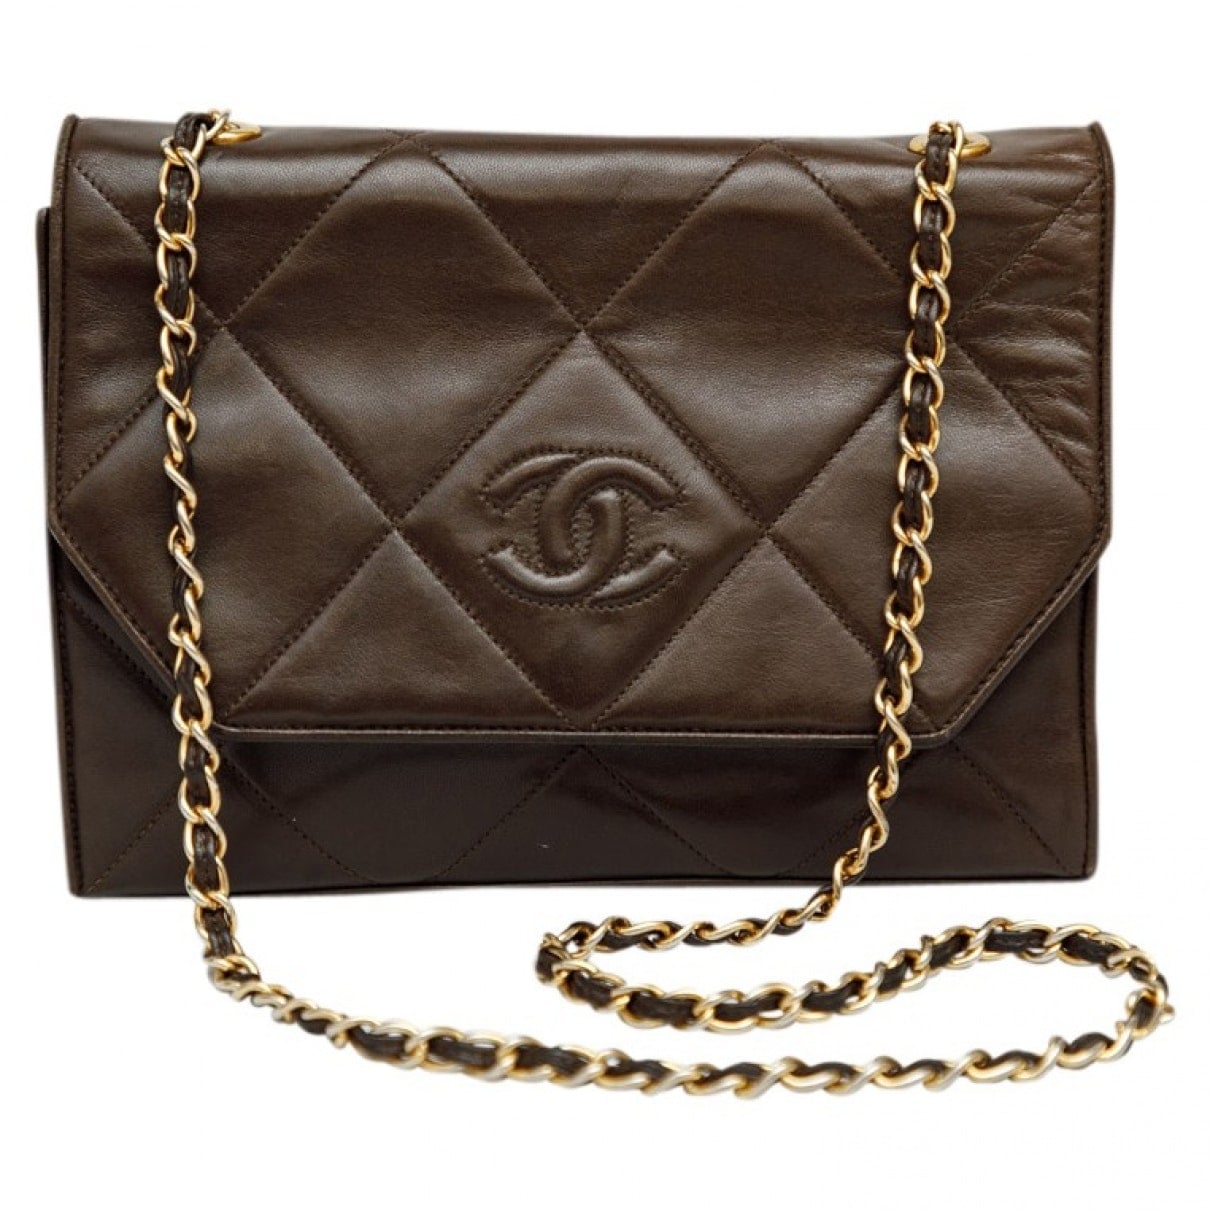 CHANEL, Bags, Chanel Gabrielle Coco Black Leather Greyblack Tweed Small  Shoulder Hobo Bag